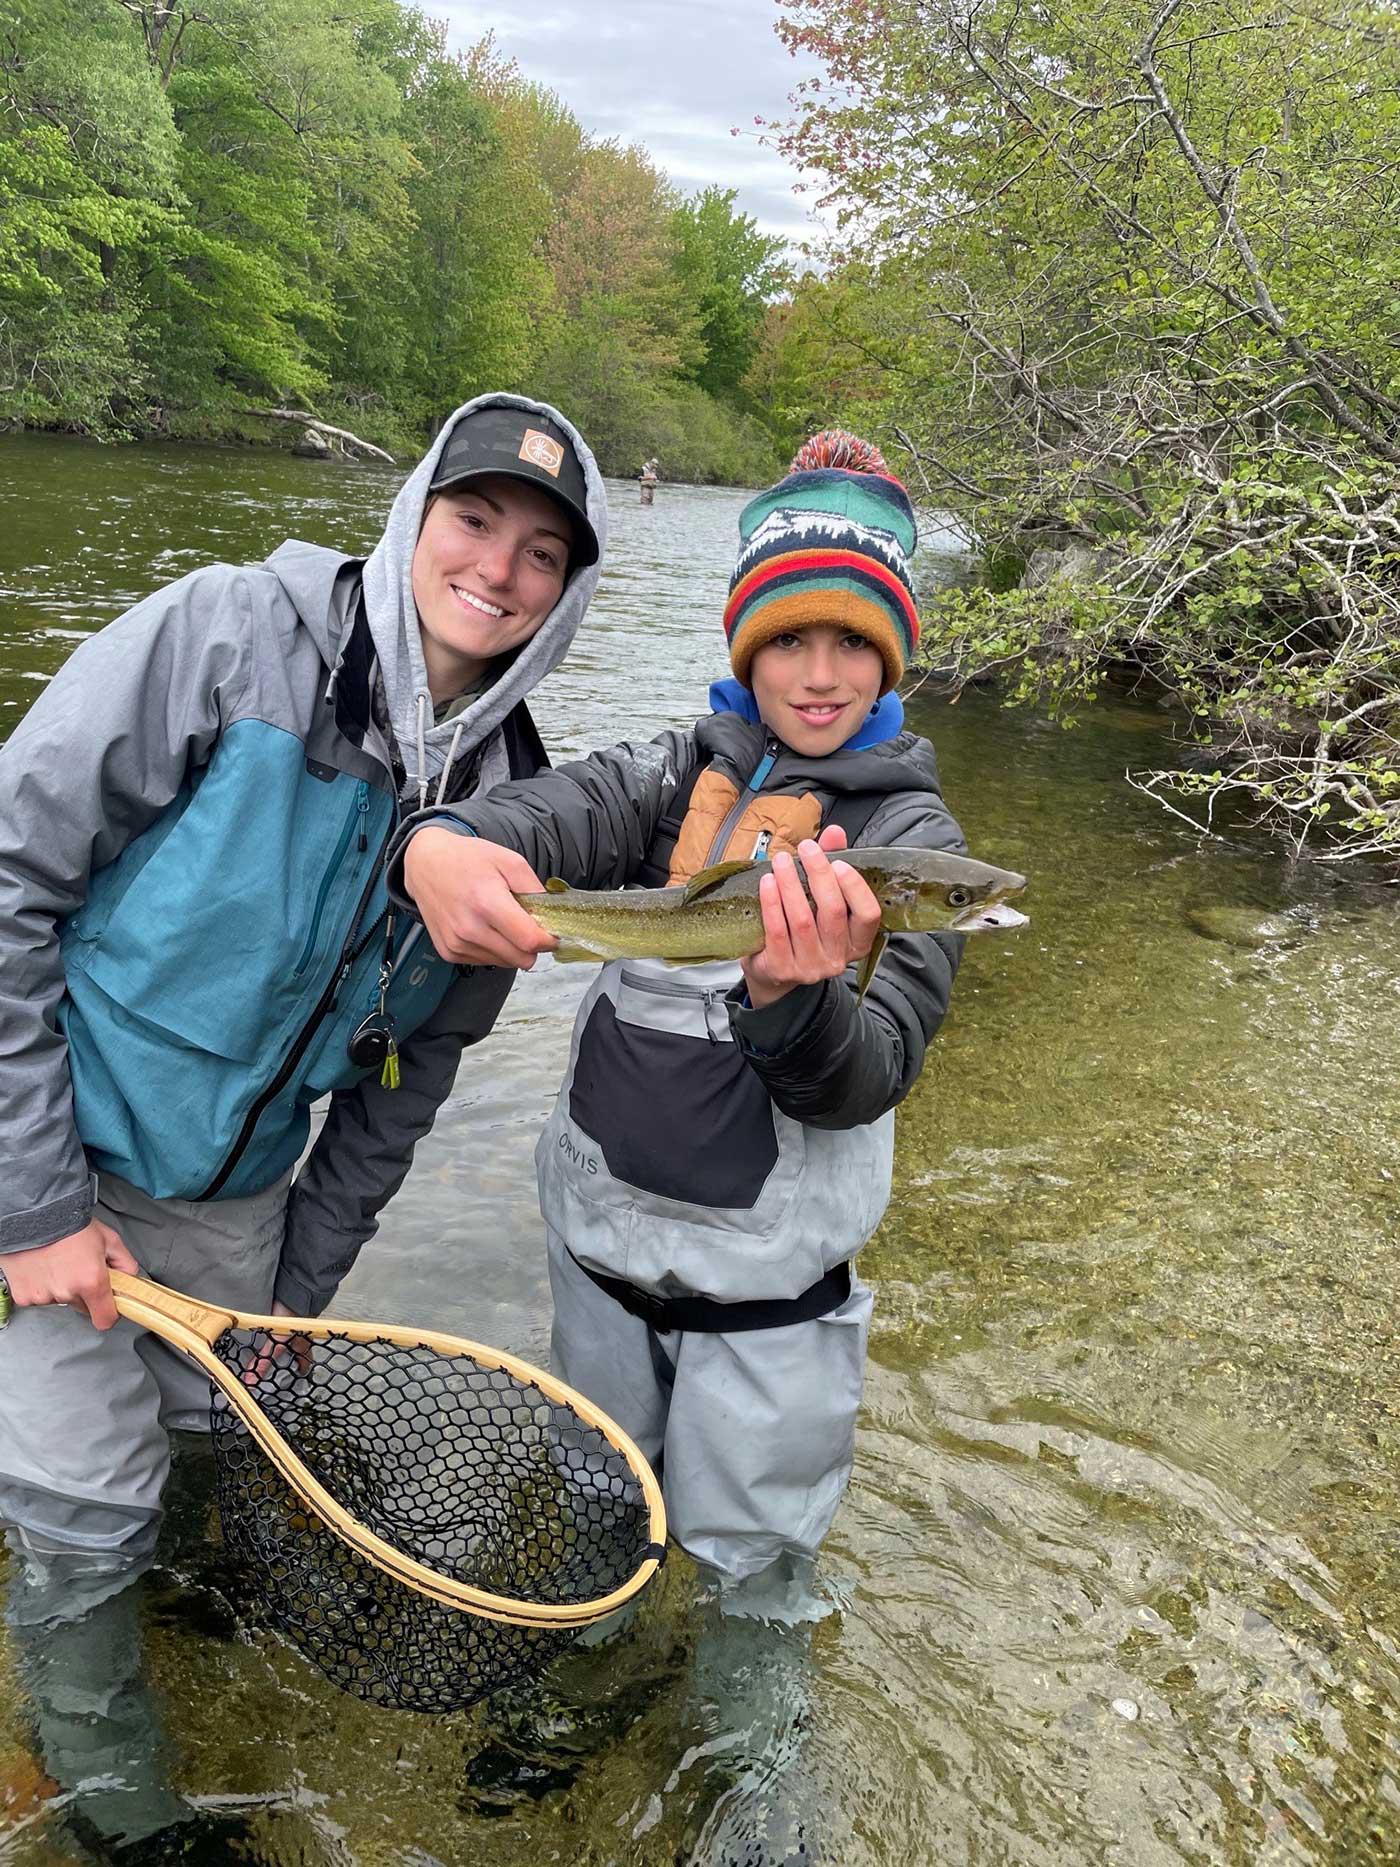 Keaton McEvoy with young boy holding fish